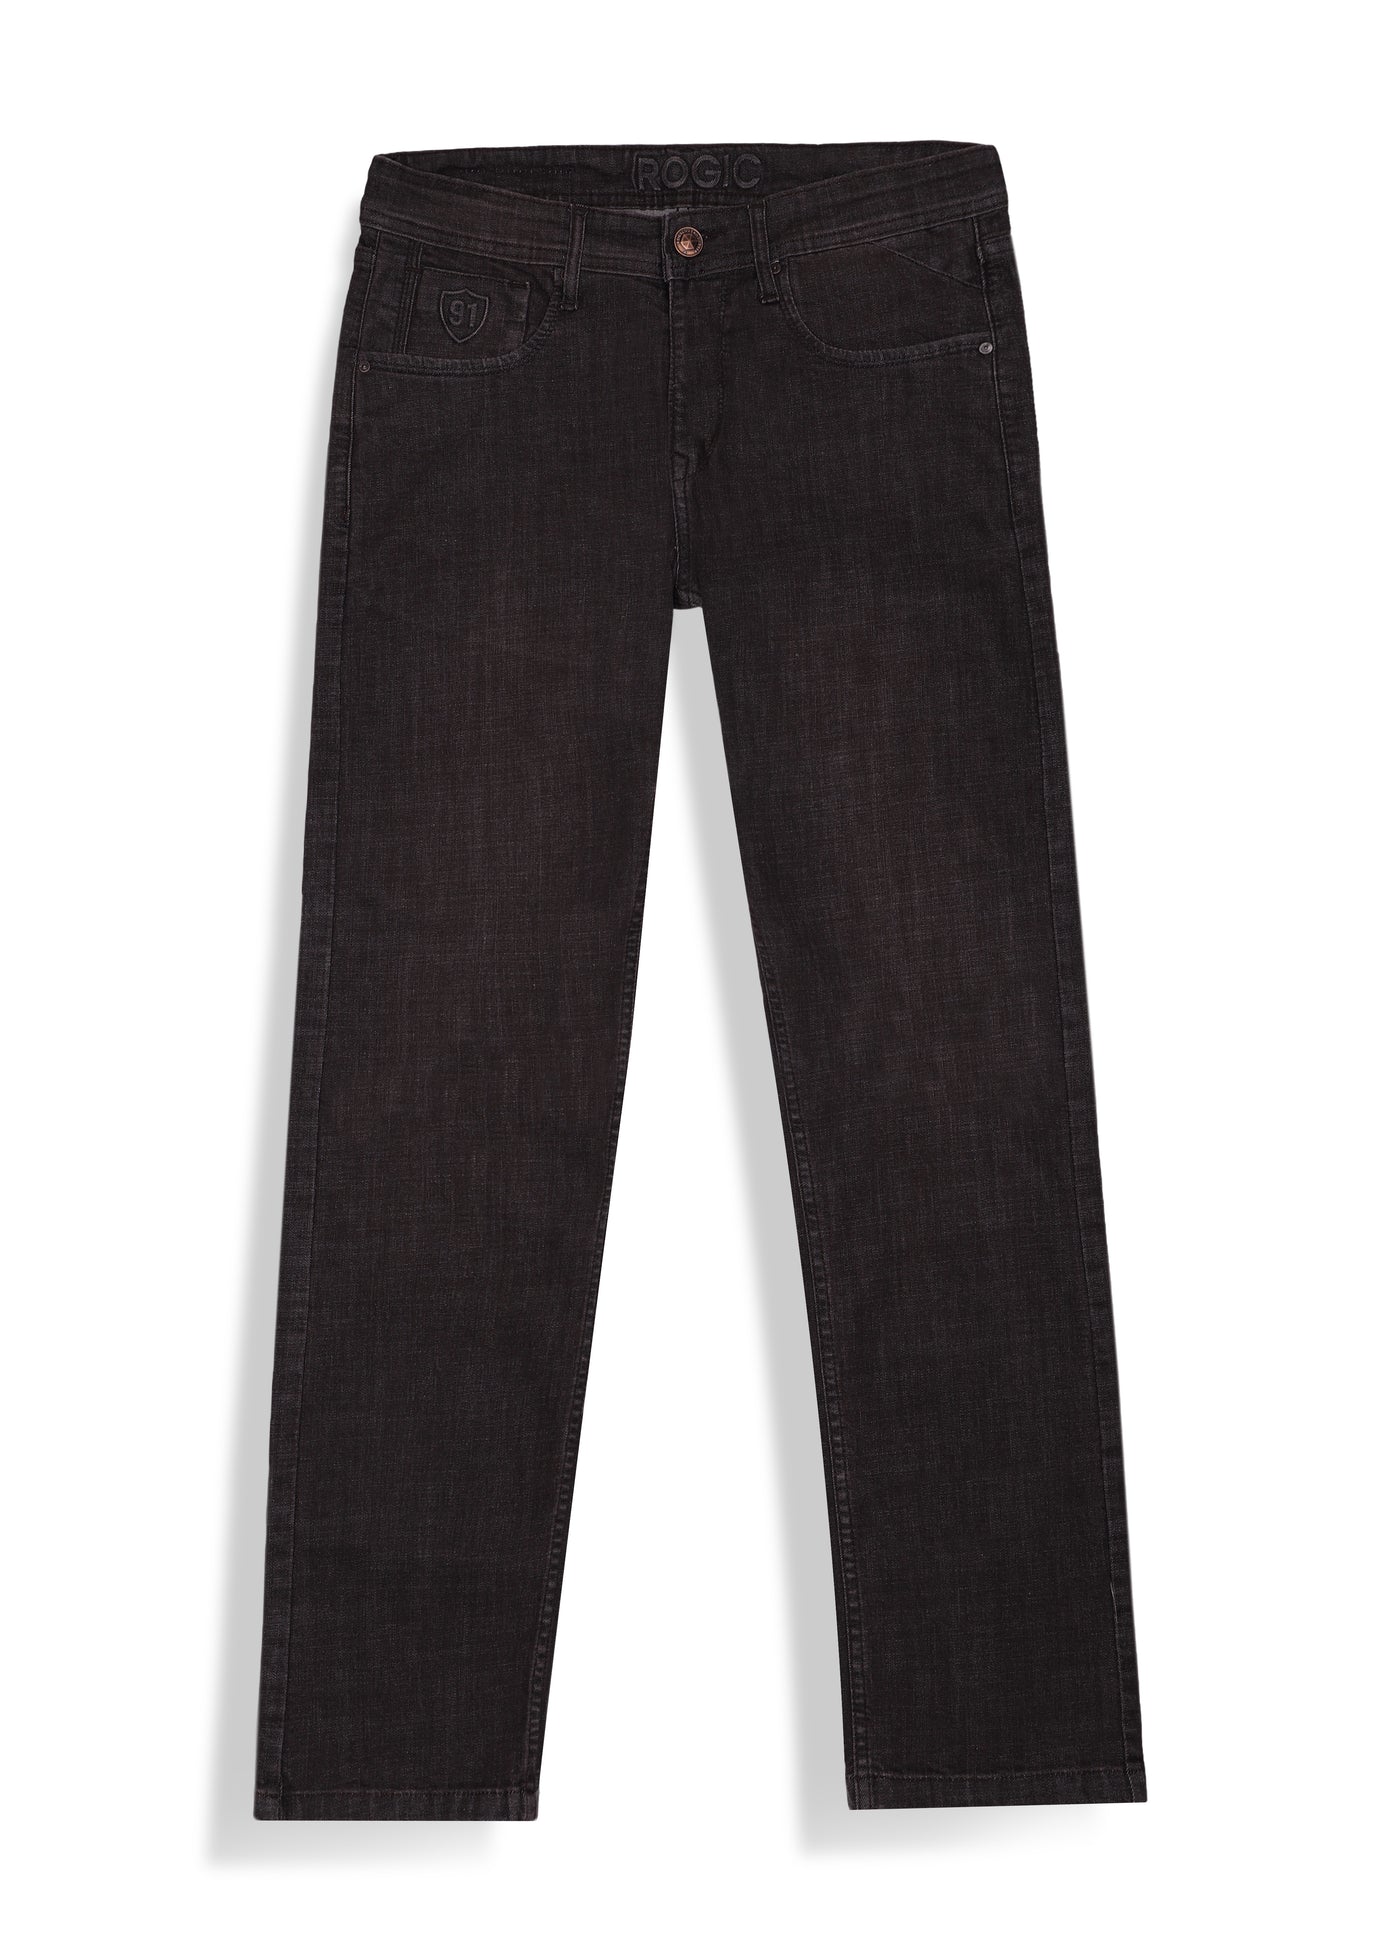 THE HARPER- MIYAKE JEANS IN BROWN